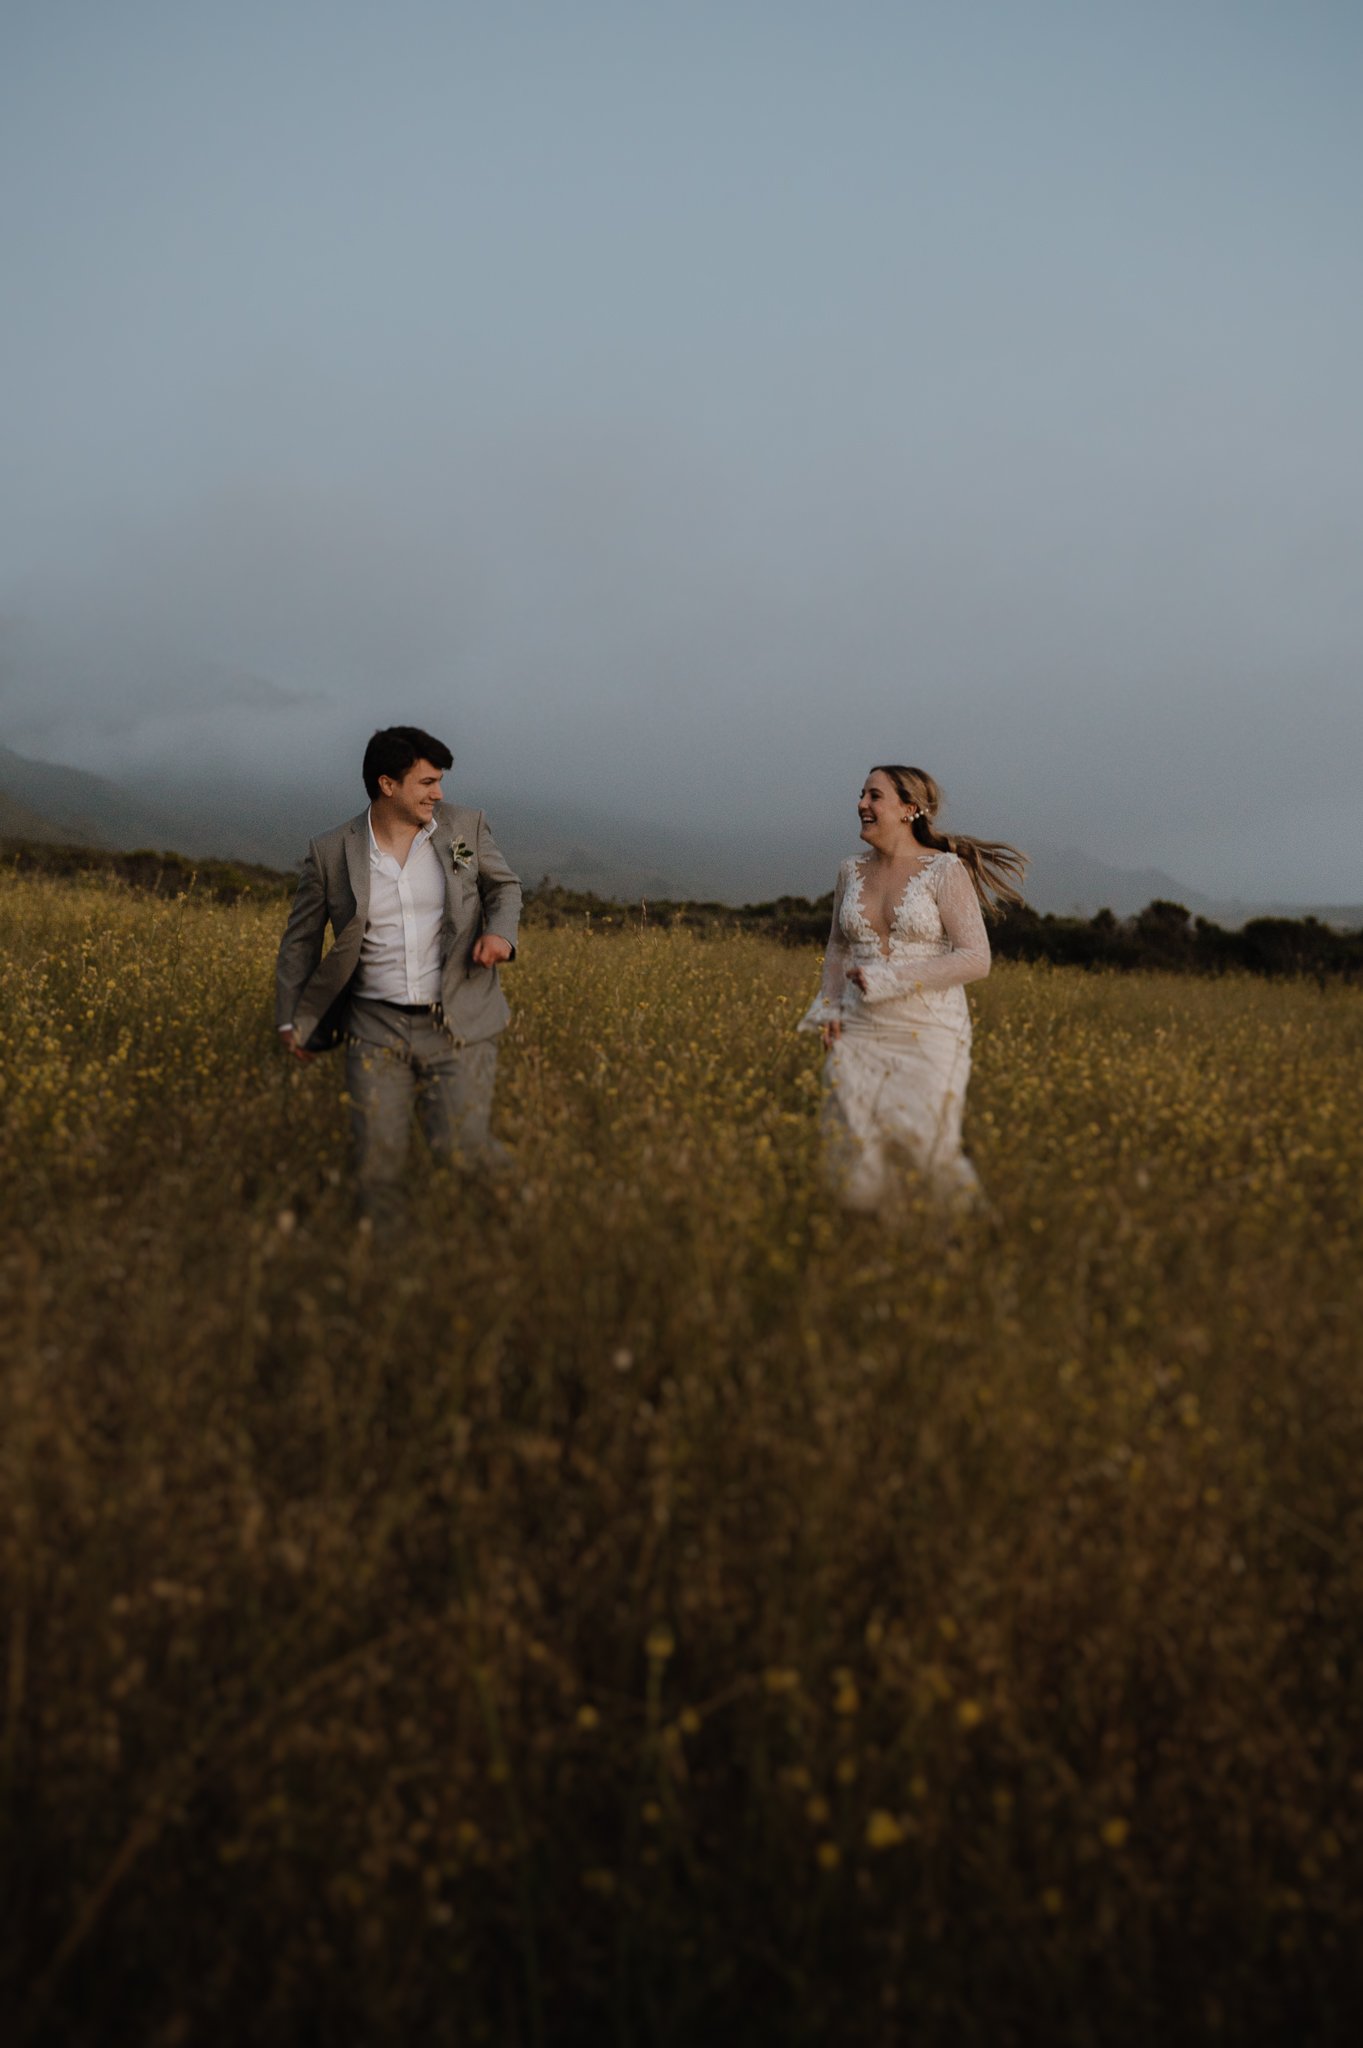 Big Sur Ventana wedding bride and groom running through grassy area smiling at each other